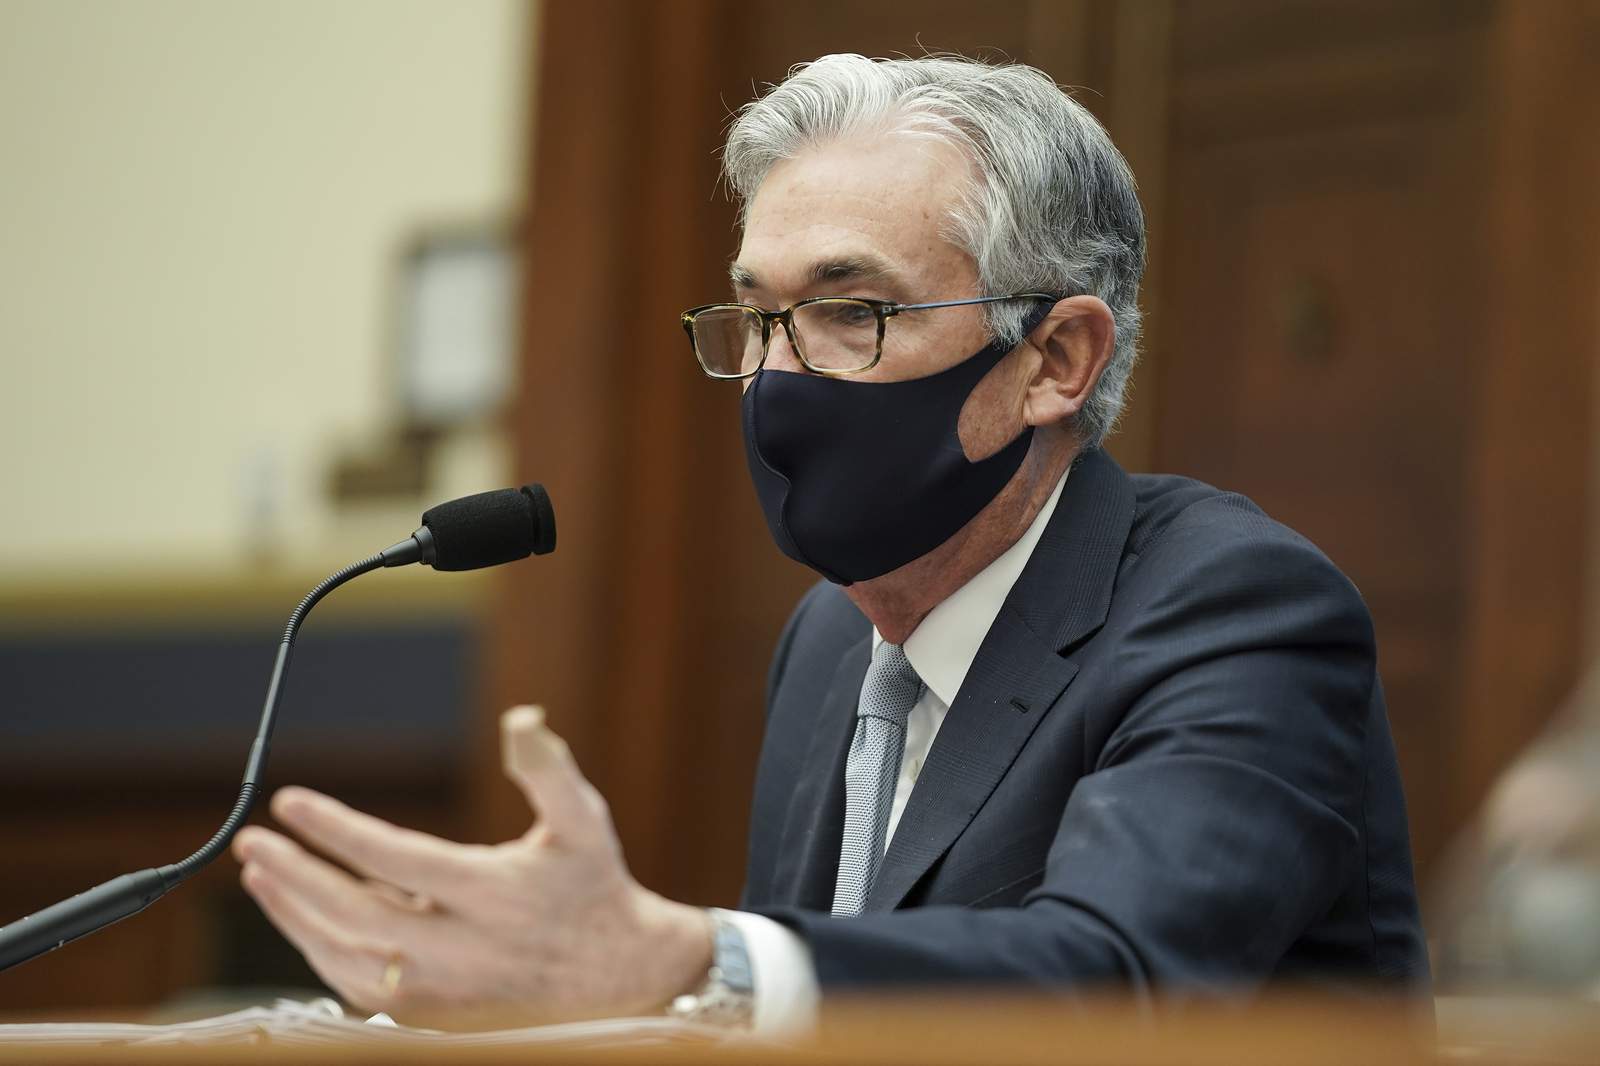 Fed will likely stress commitment to low rates amid pandemic